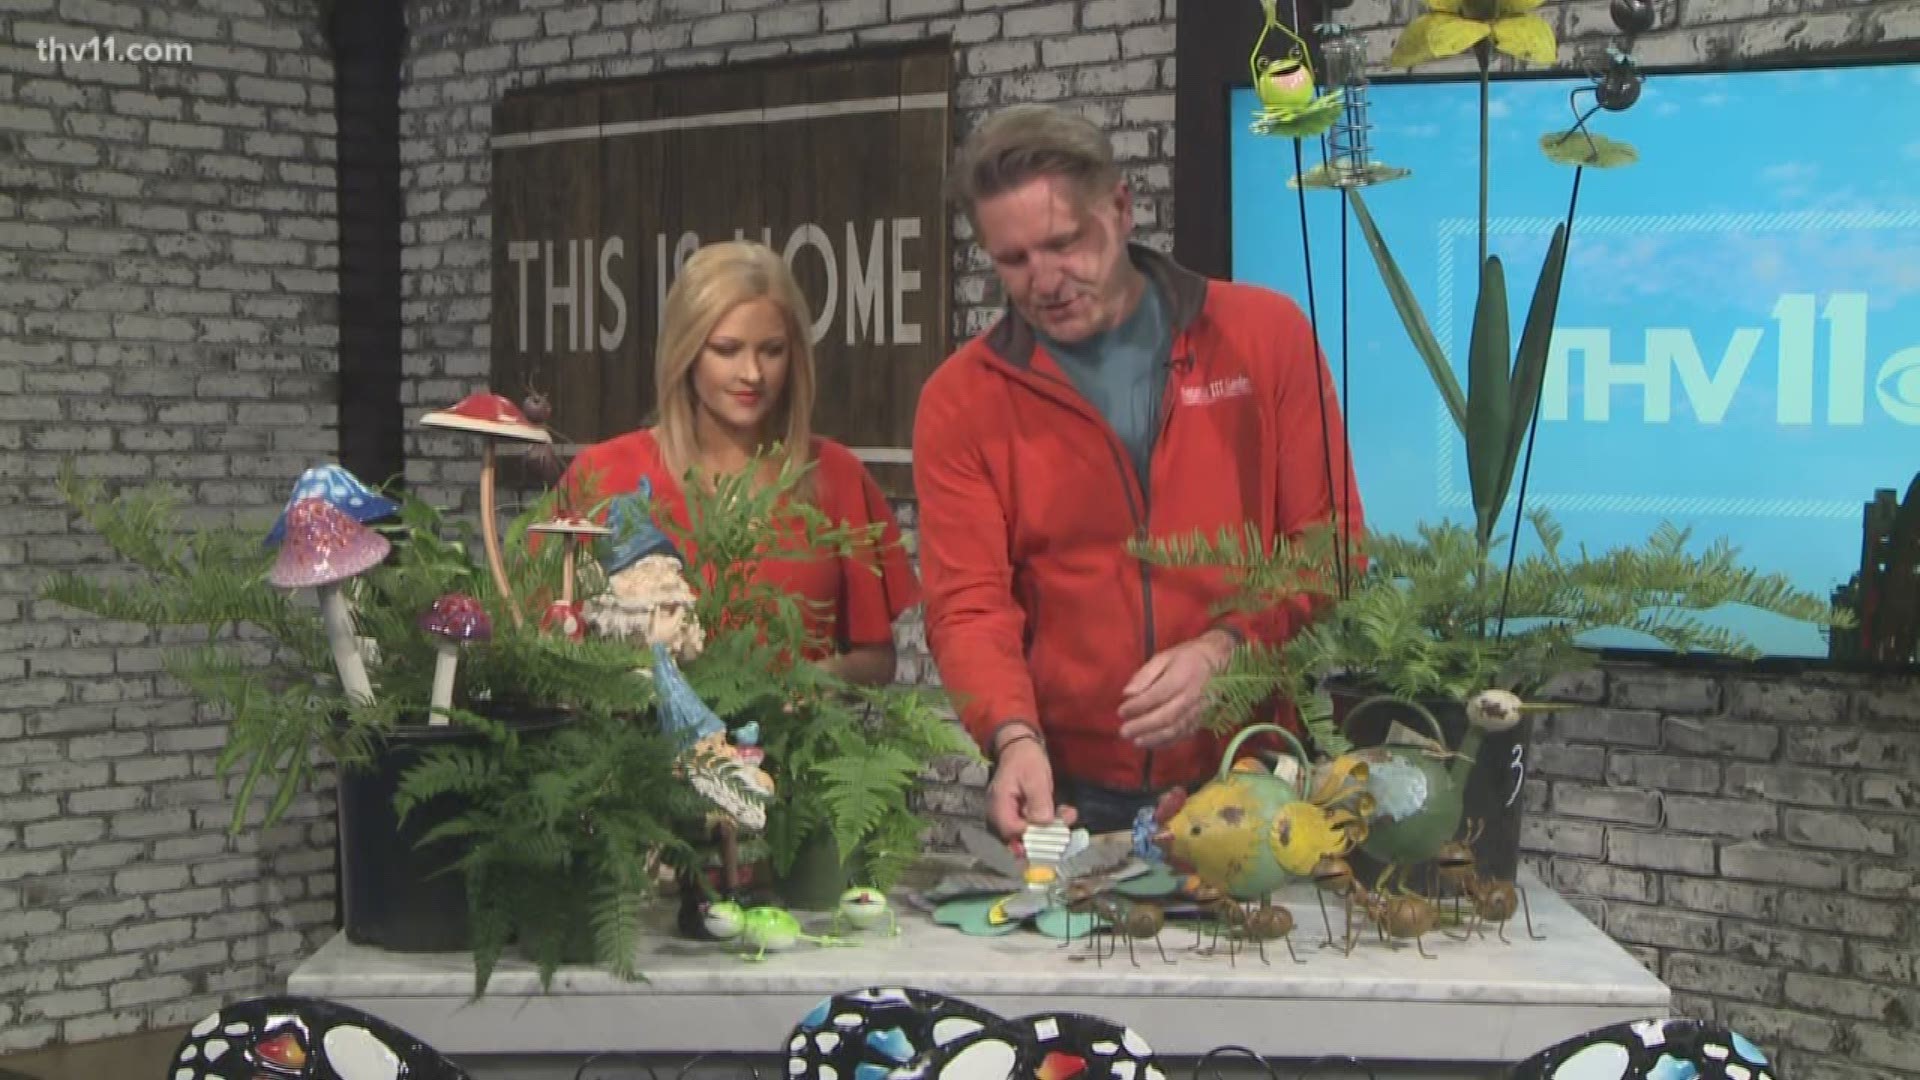 Chris H. Olsen shows us some decor that will add humor to your garden.